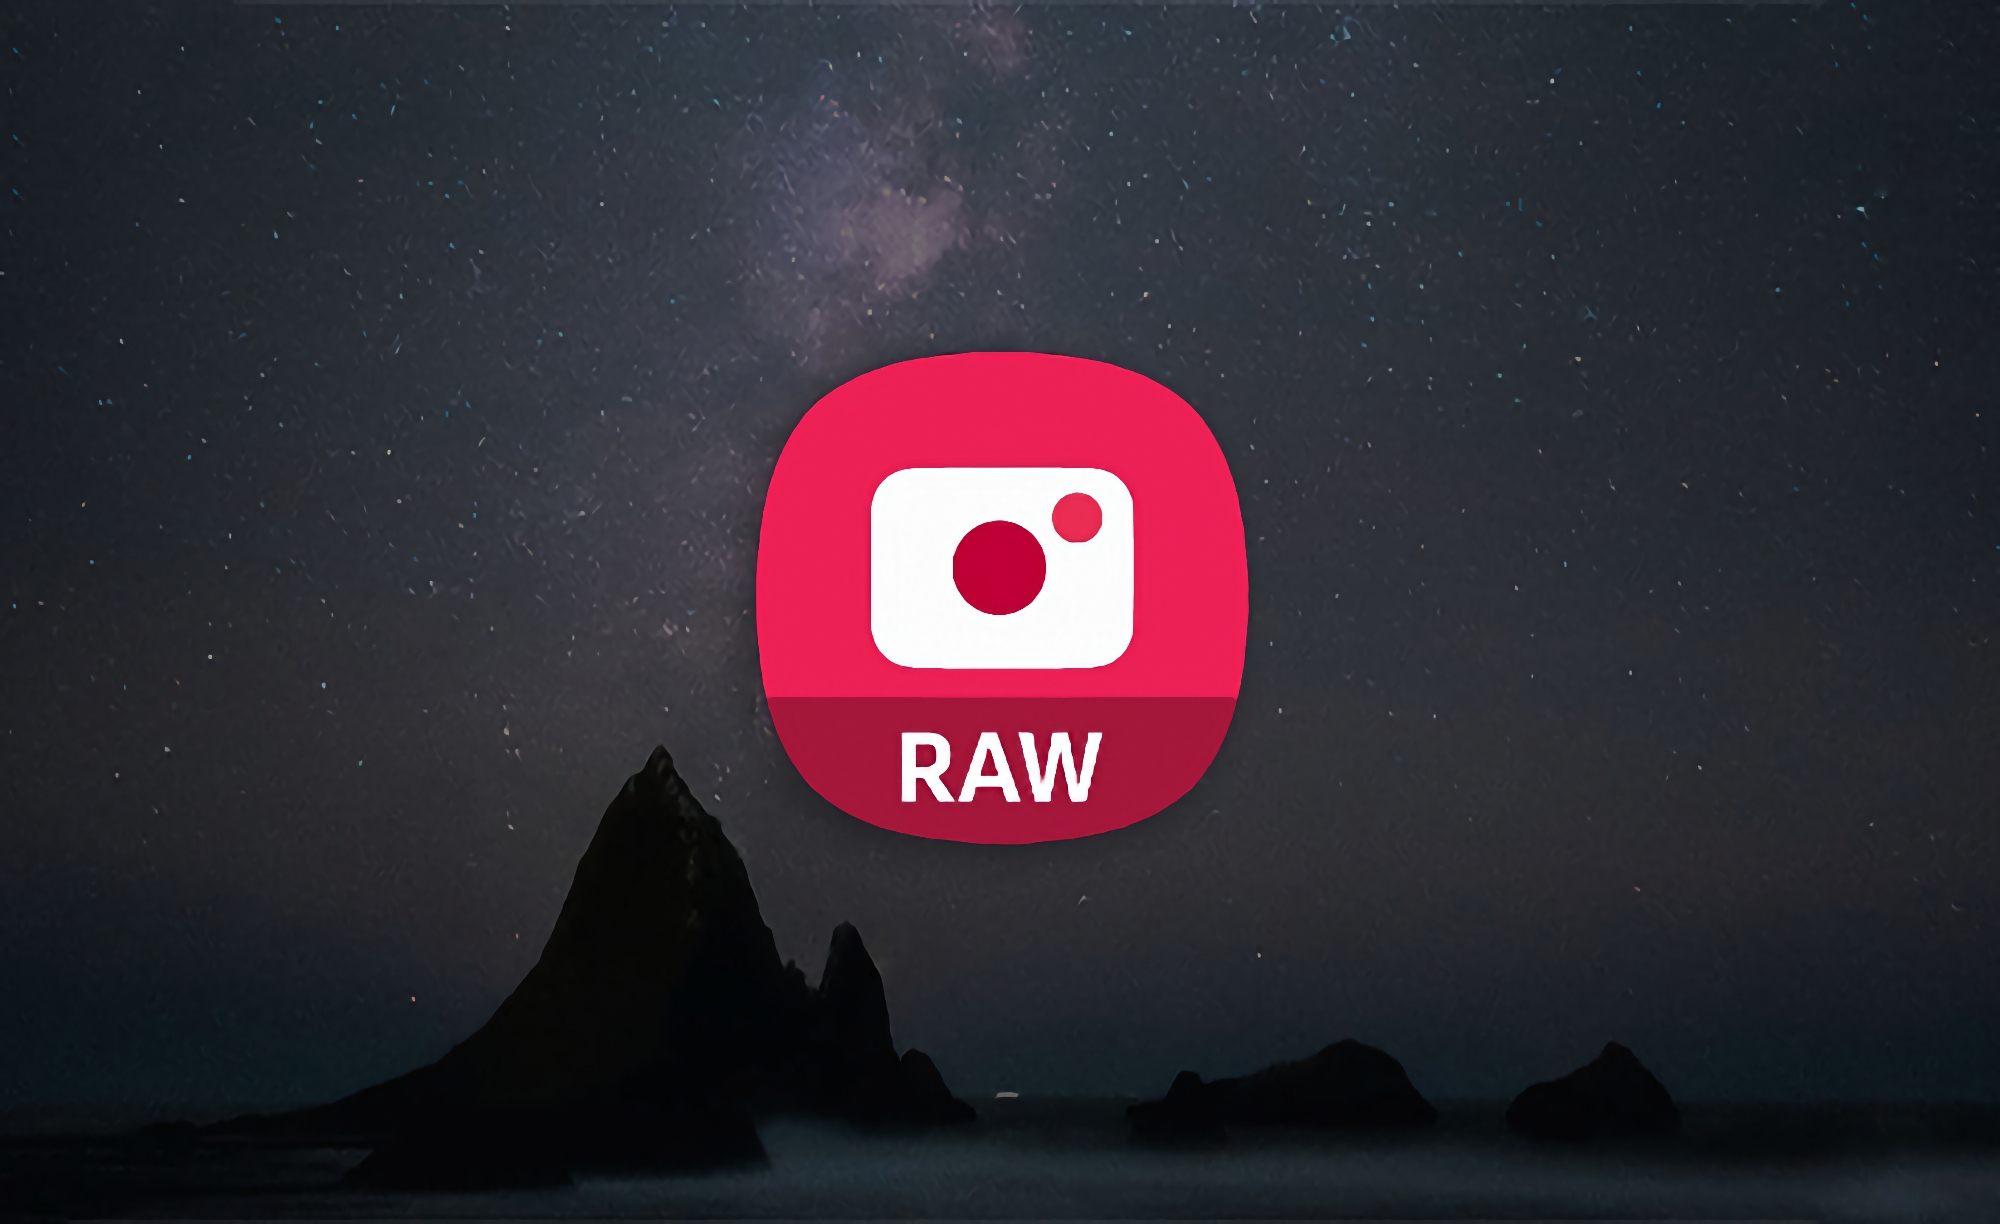 Galaxy S21, Galaxy S21+, Galaxy S21 Ultra and Galaxy Fold 4 users get astrophotography mode with Expert RAW app update